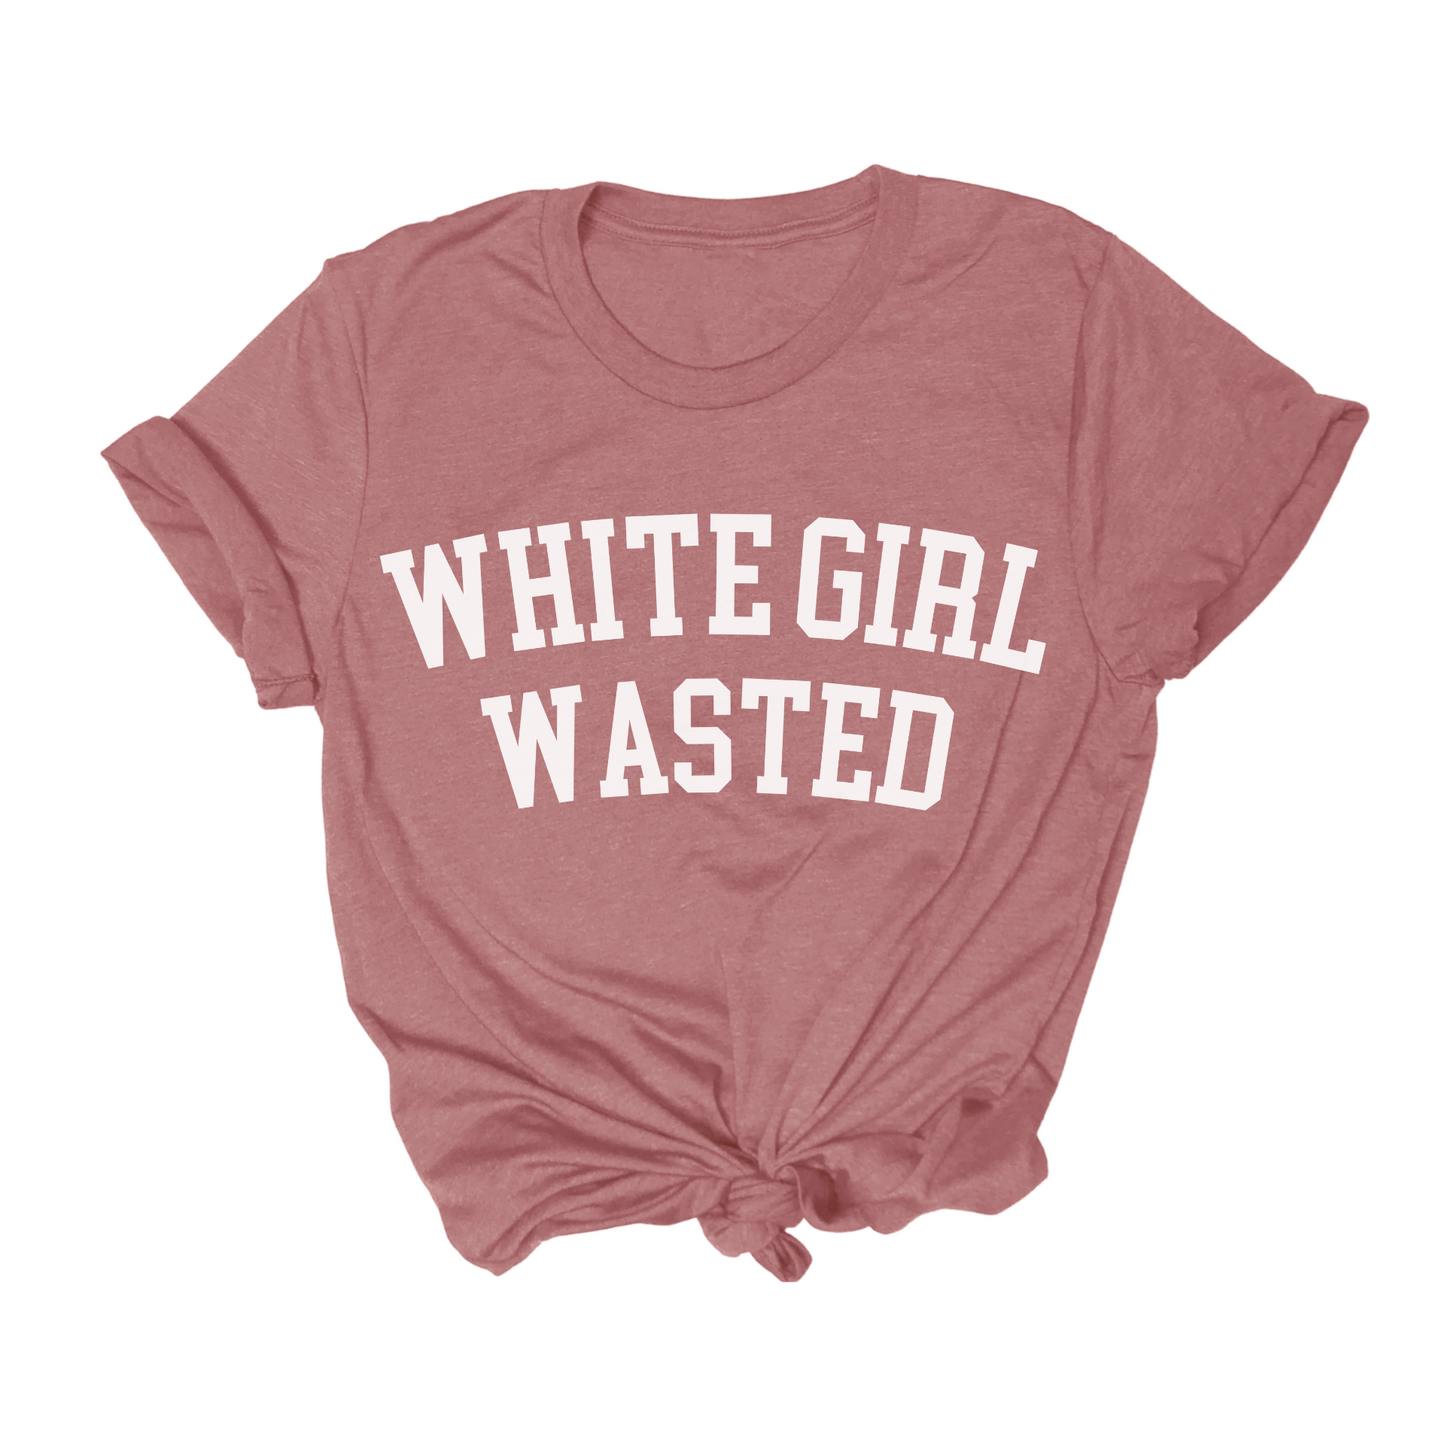 White Girl Wasted Tee